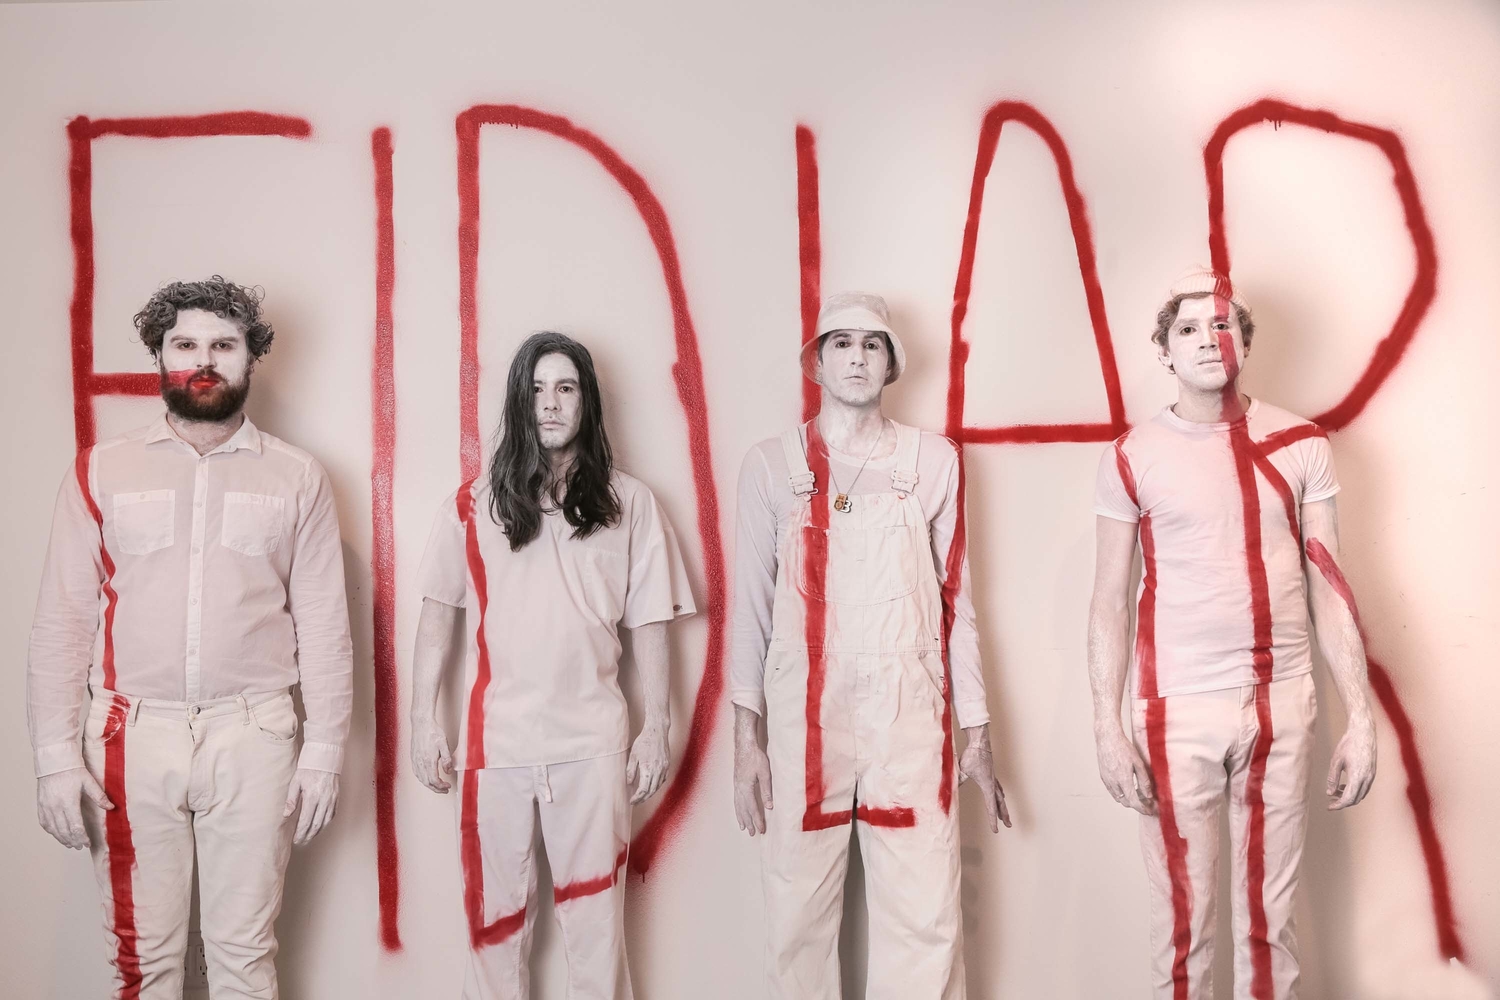 FIDLAR are back with new song ‘Are You High?’